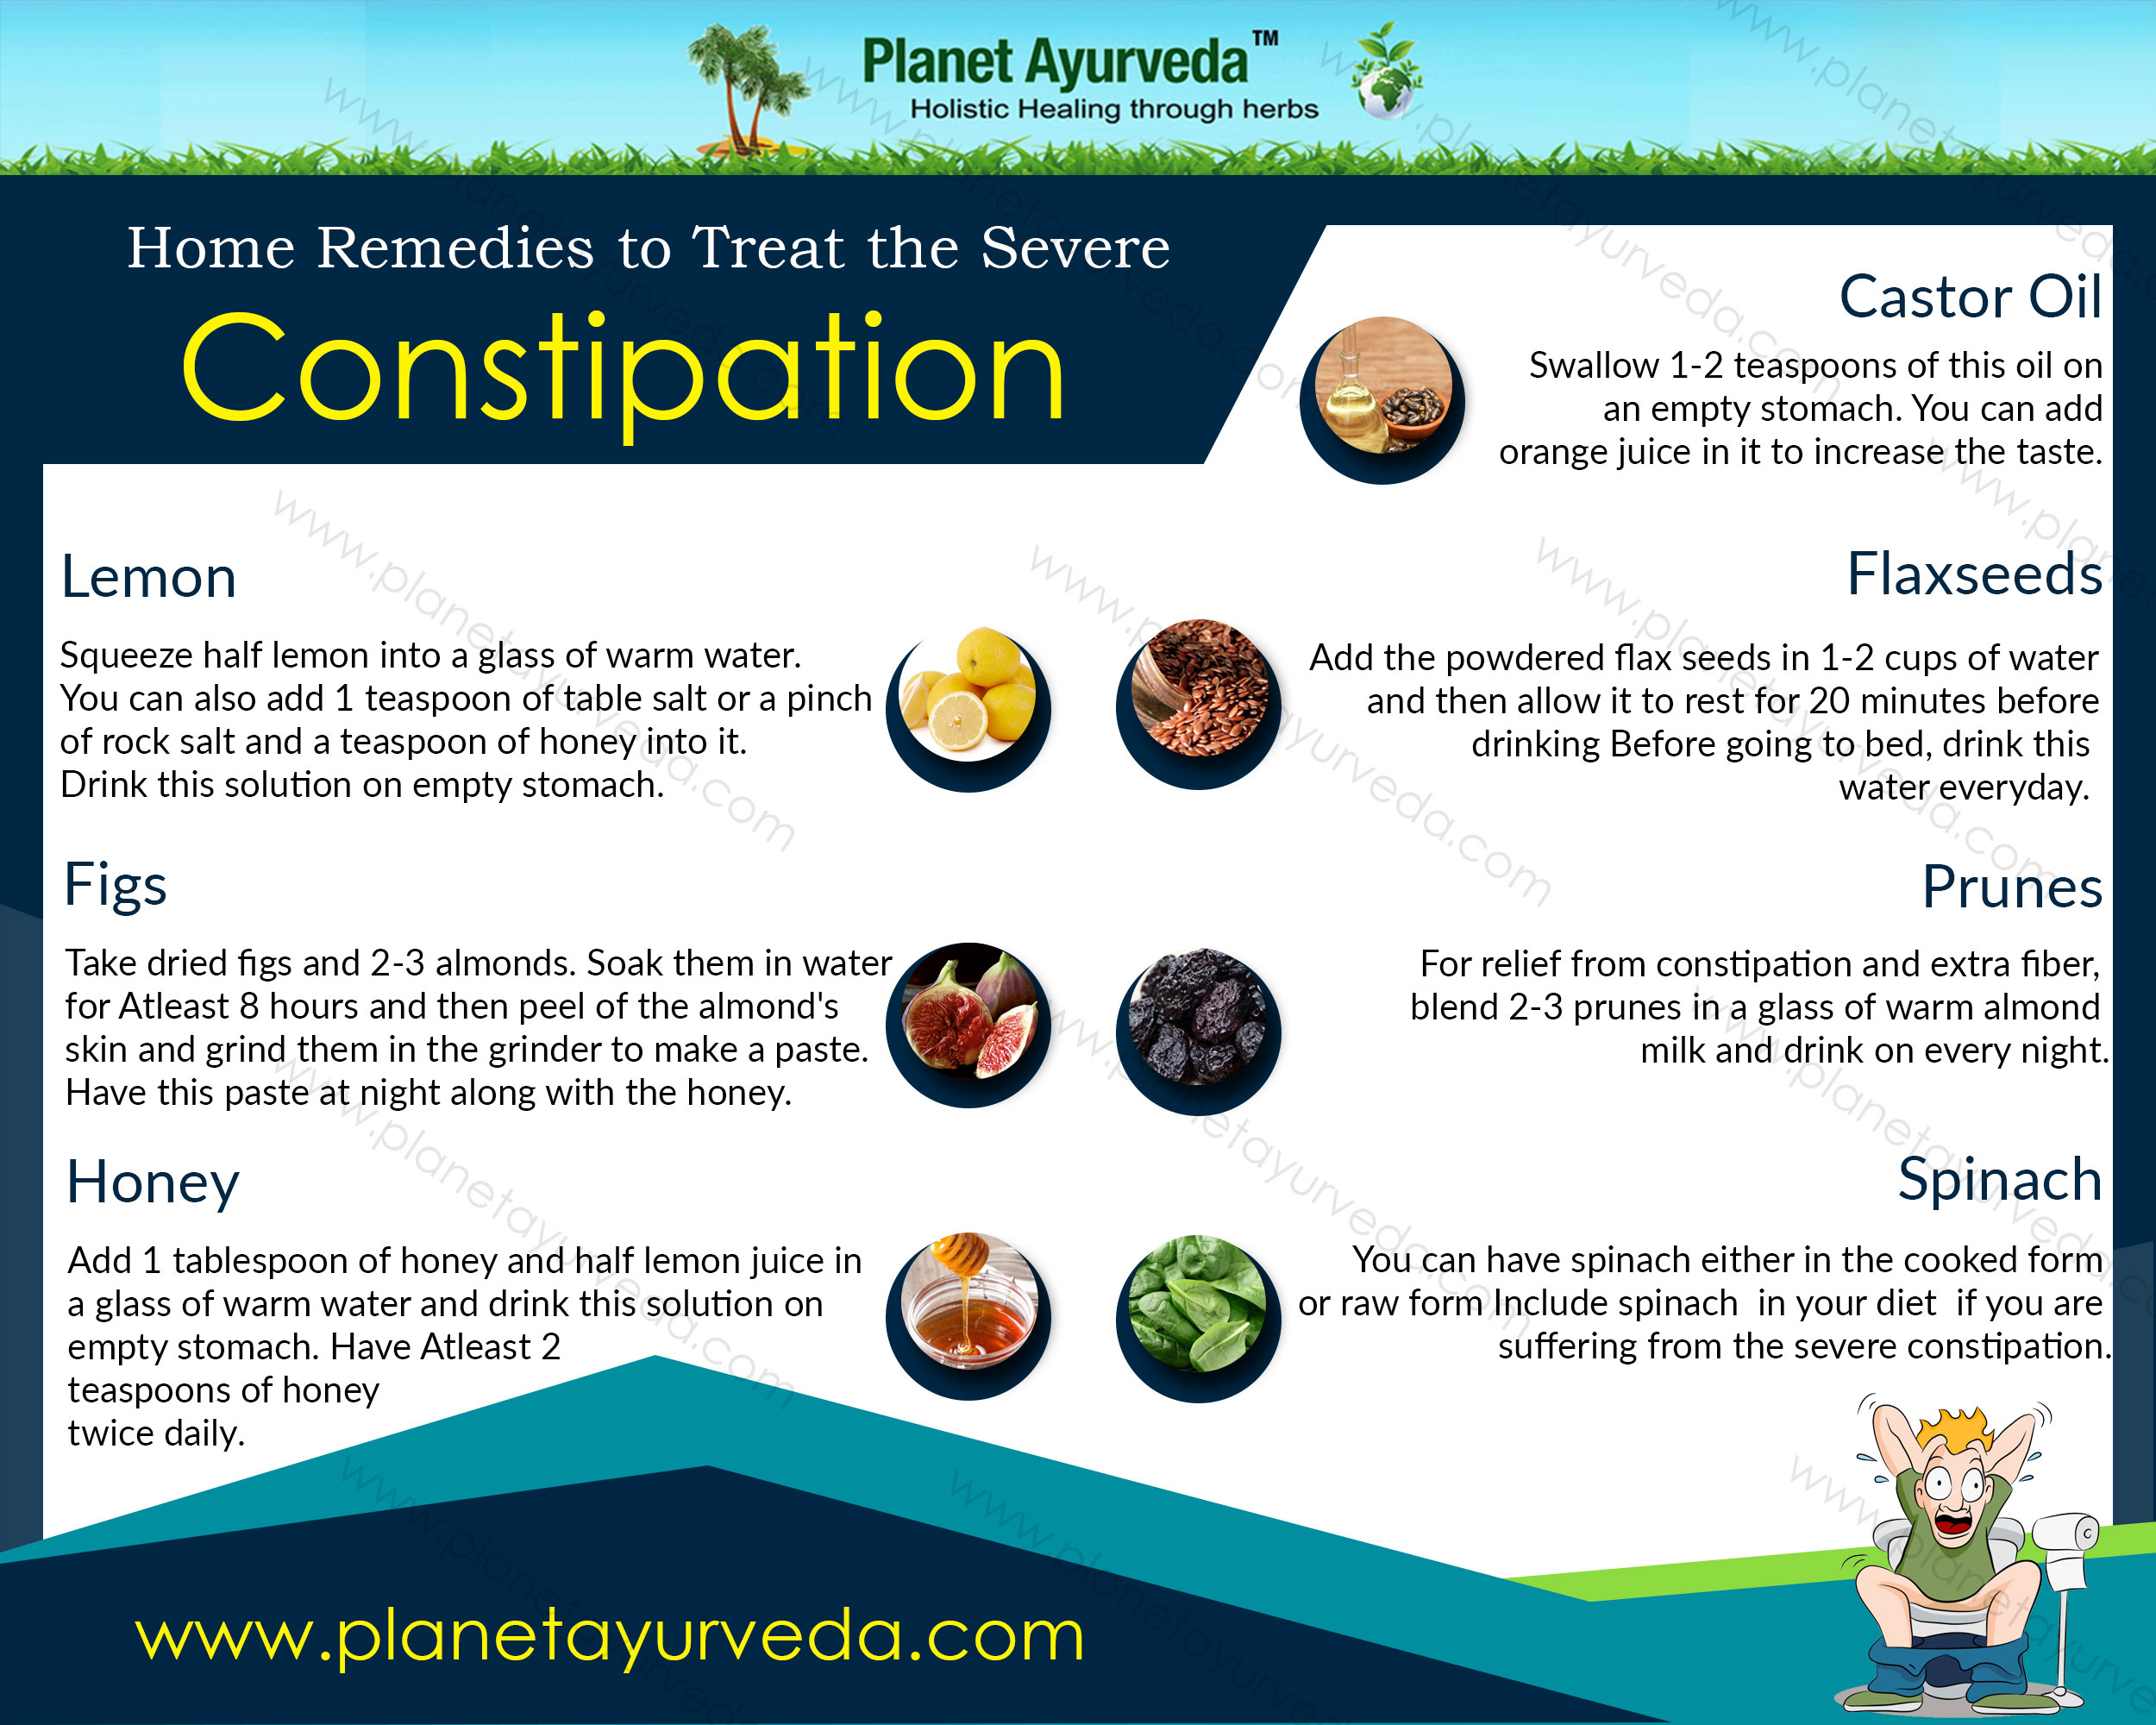 Top 7 Home Remedies for Severe Constipation